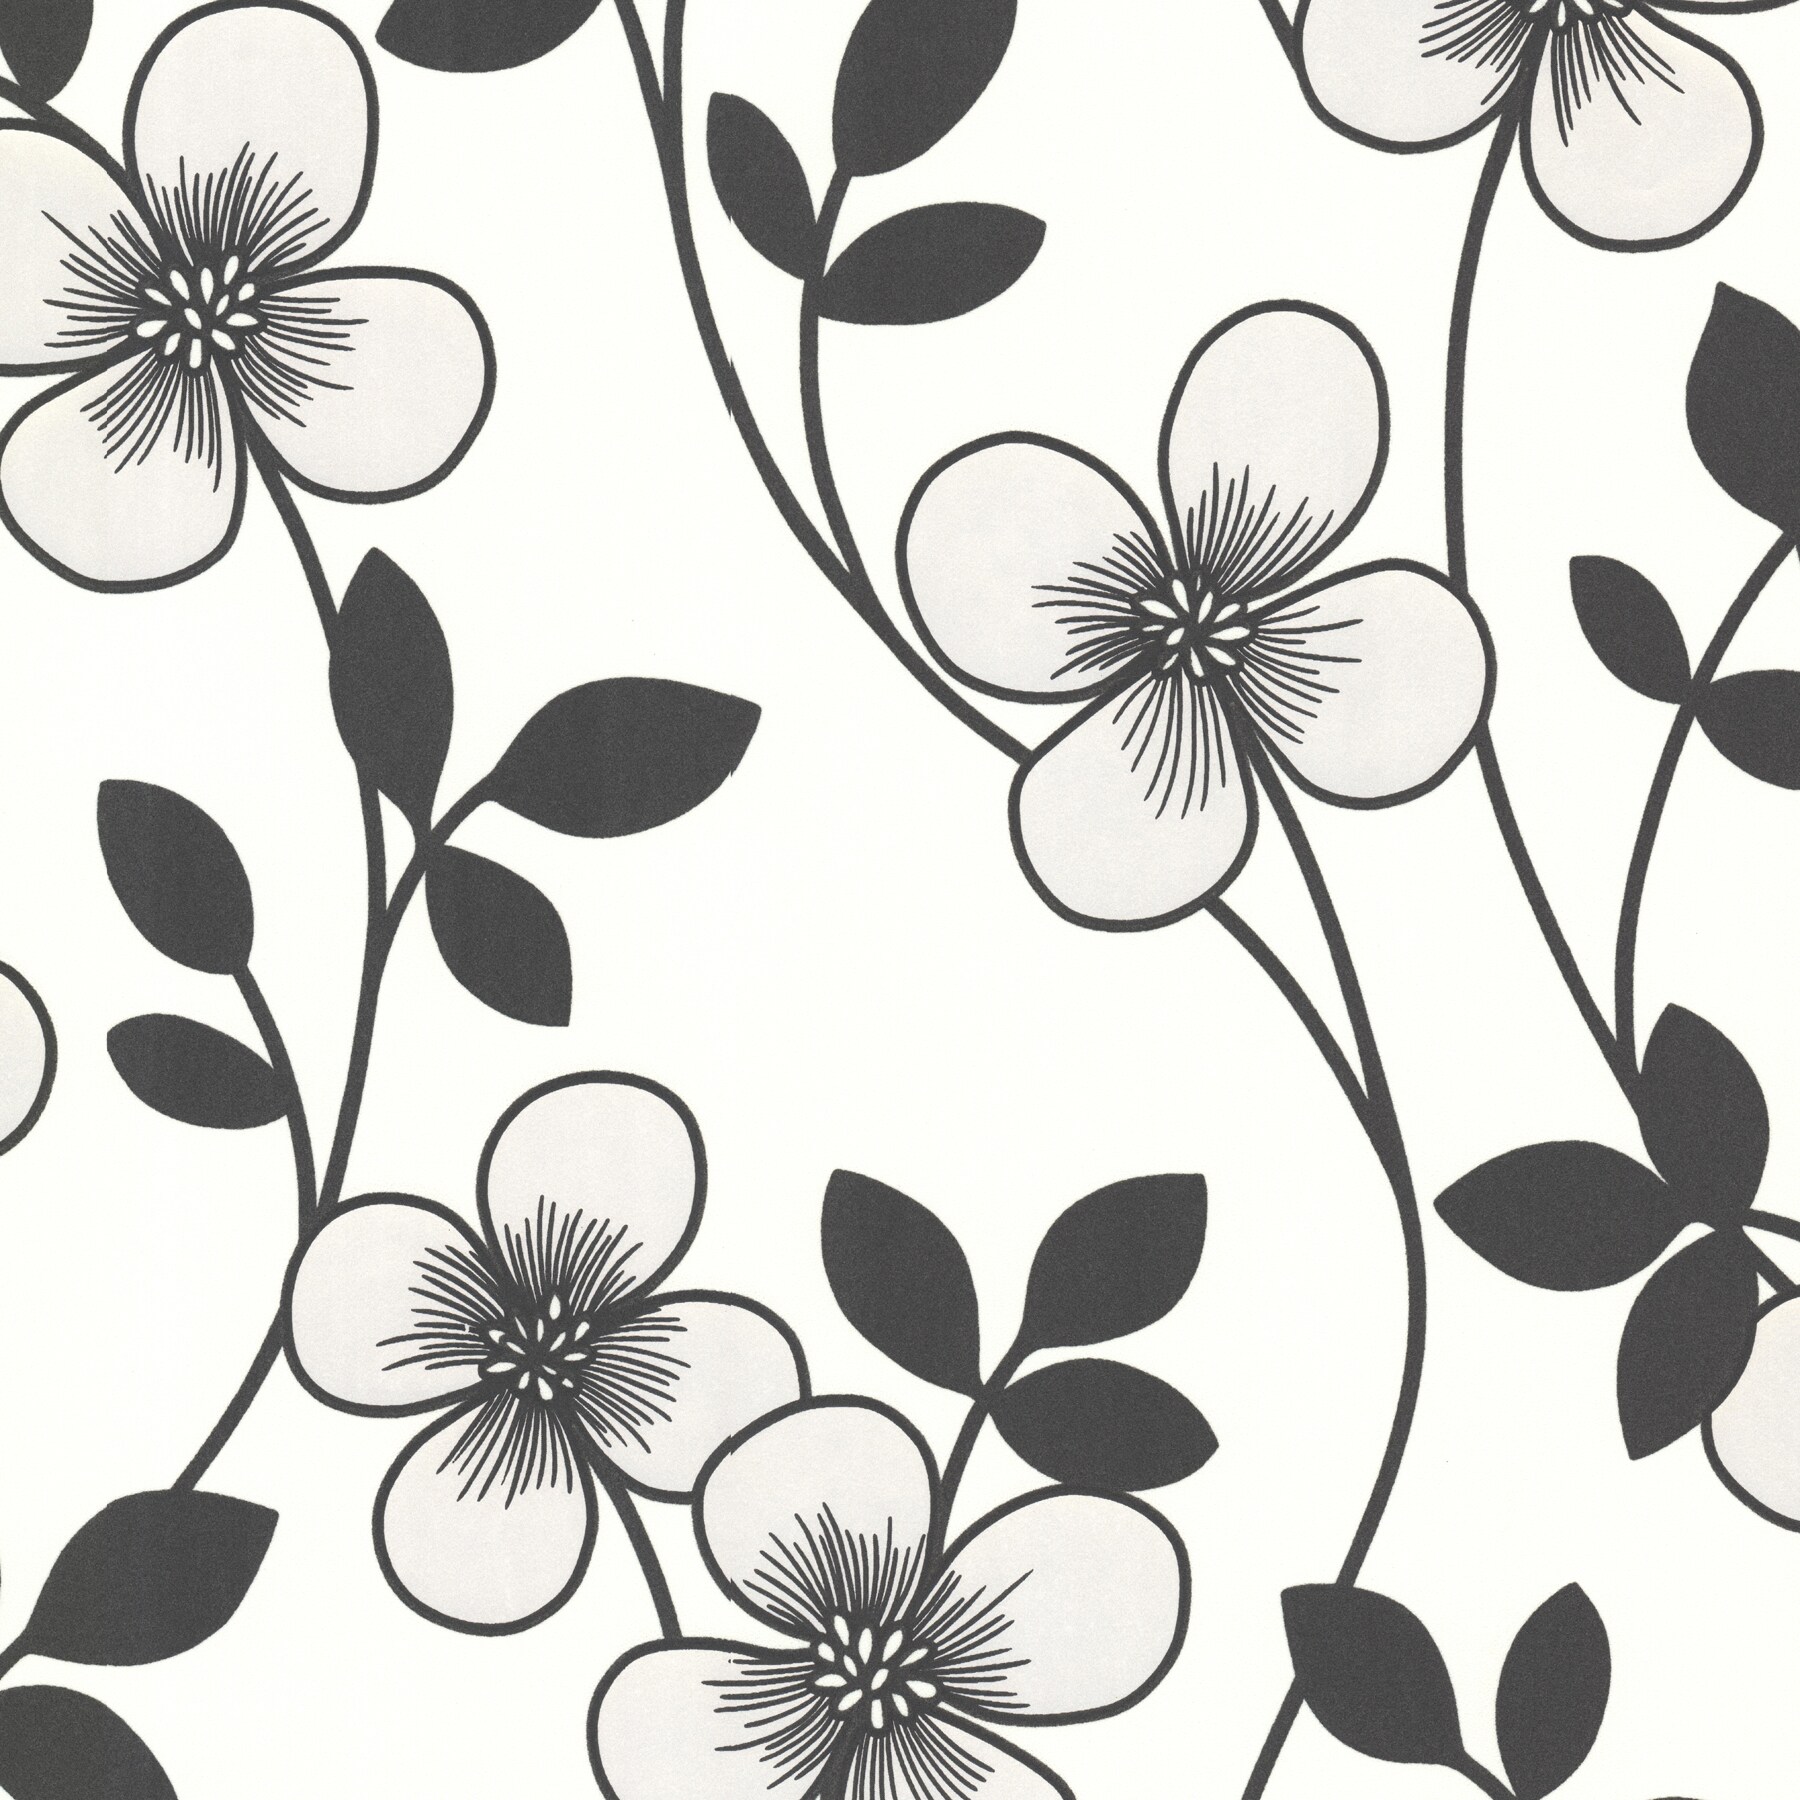 Decorline Elements 56 Sq Ft Black White Non Woven Floral Unpasted Paste The Wall Wallpaper In The Wallpaper Department At Lowes Com